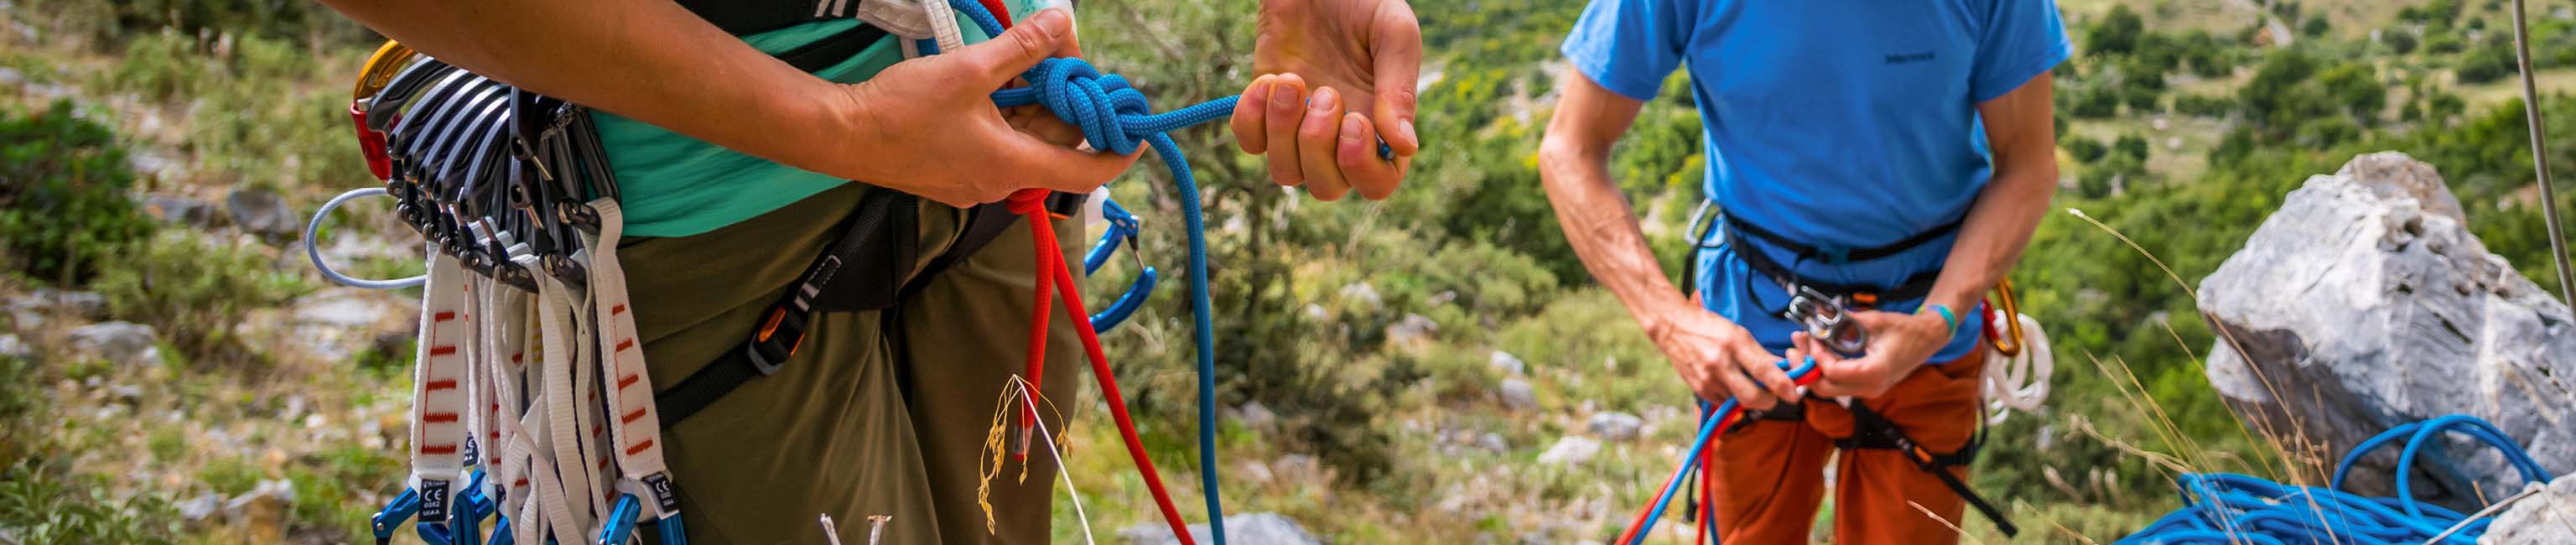 Shop our huge selection of Climbing Gear